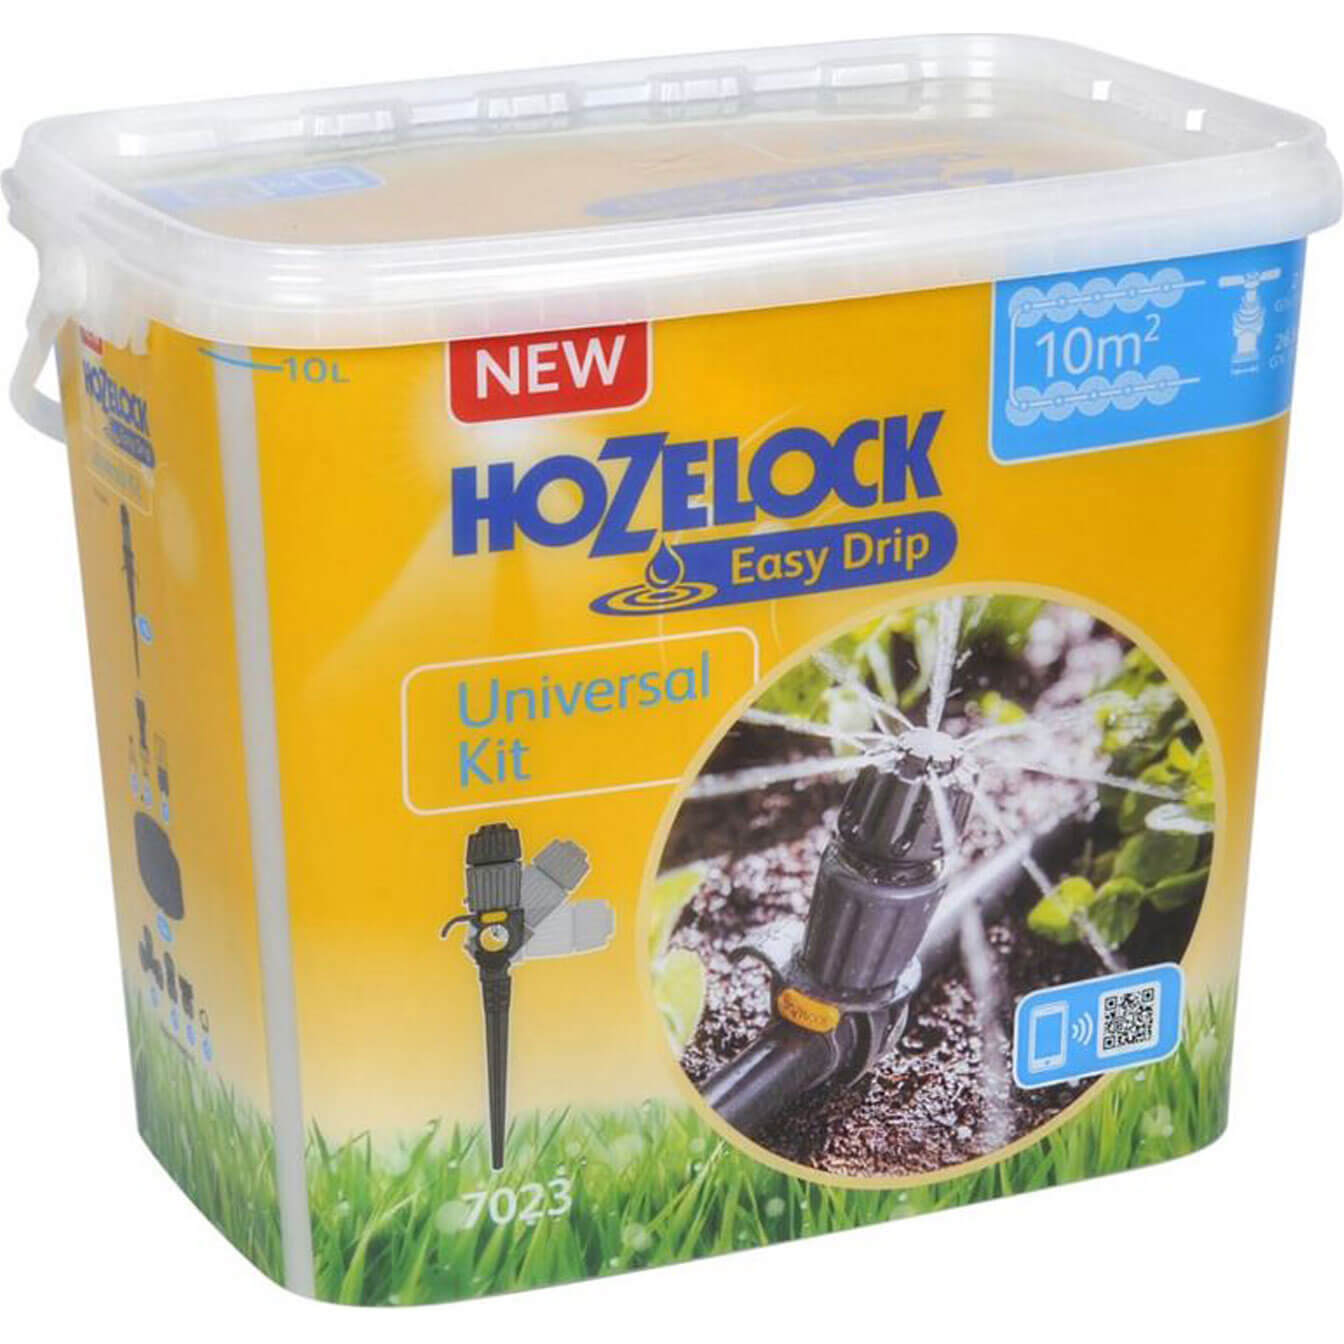 Photos - Other for Irrigation Hozelock Universal EASY DRIP Garden Watering System 7023 